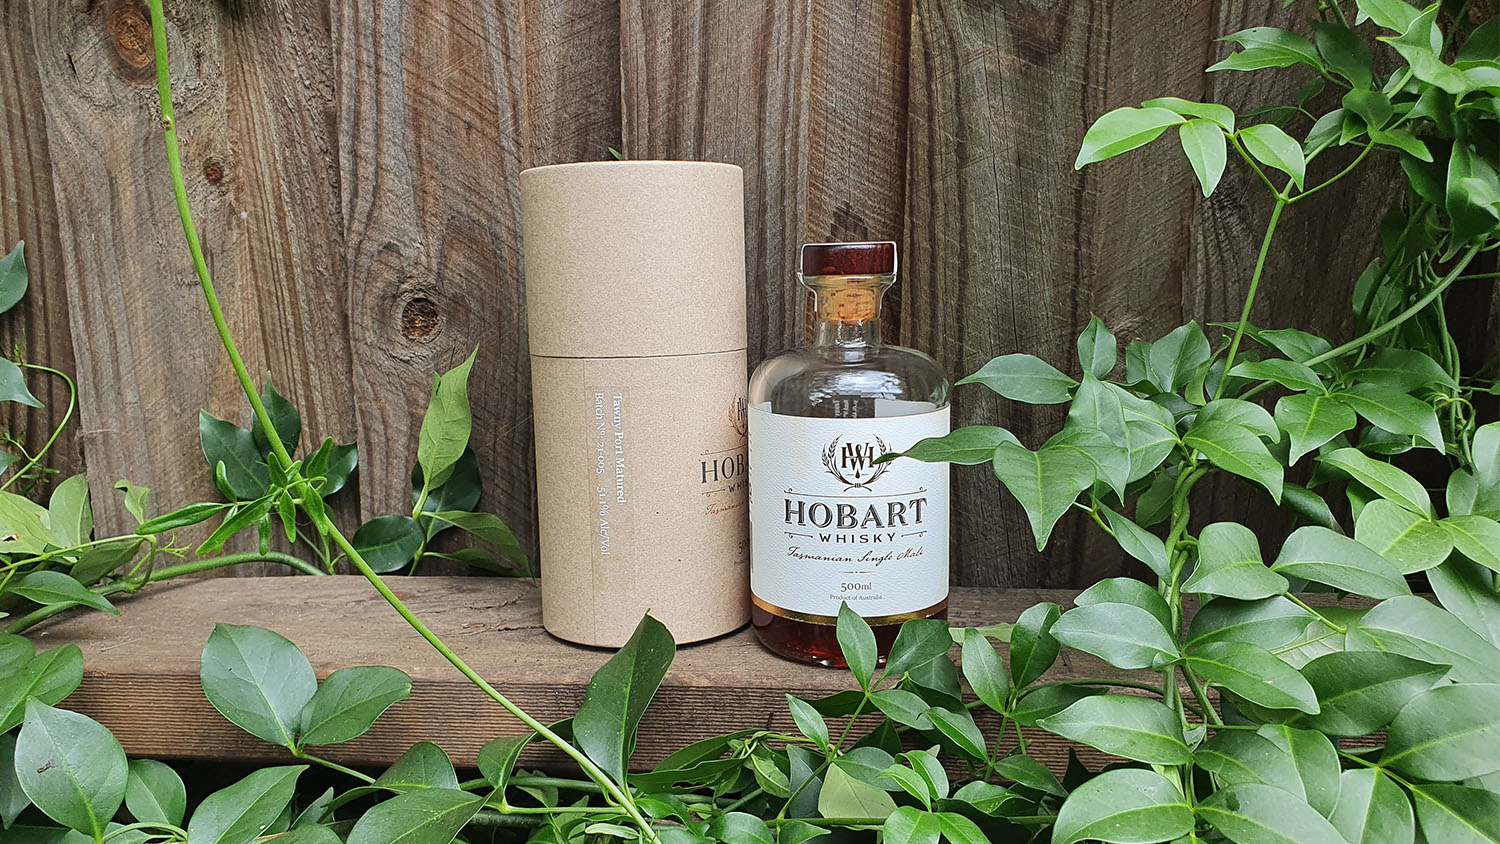 Hobart Tawny Cask 21-005 Whisky Review